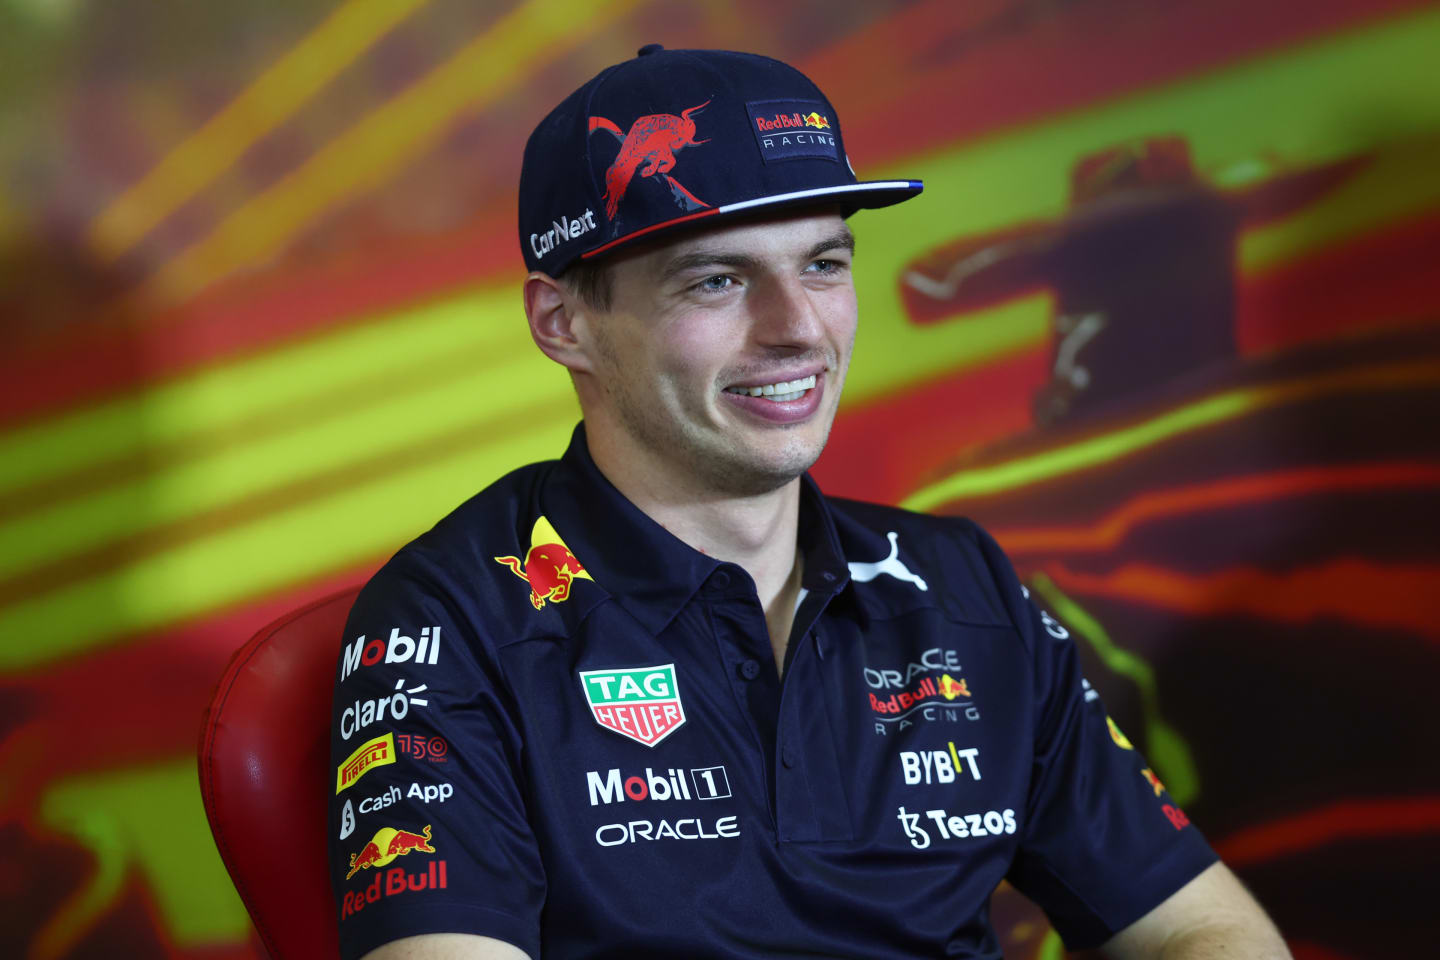 BARCELONA, SPAIN - MAY 20: Max Verstappen of the Netherlands and Oracle Red Bull Racing looks on in the Drivers Press Conference prior to practice ahead of the F1 Grand Prix of Spain at Circuit de Barcelona-Catalunya on May 20, 2022 in Barcelona, Spain. (Photo by Lars Baron/Getty Images)